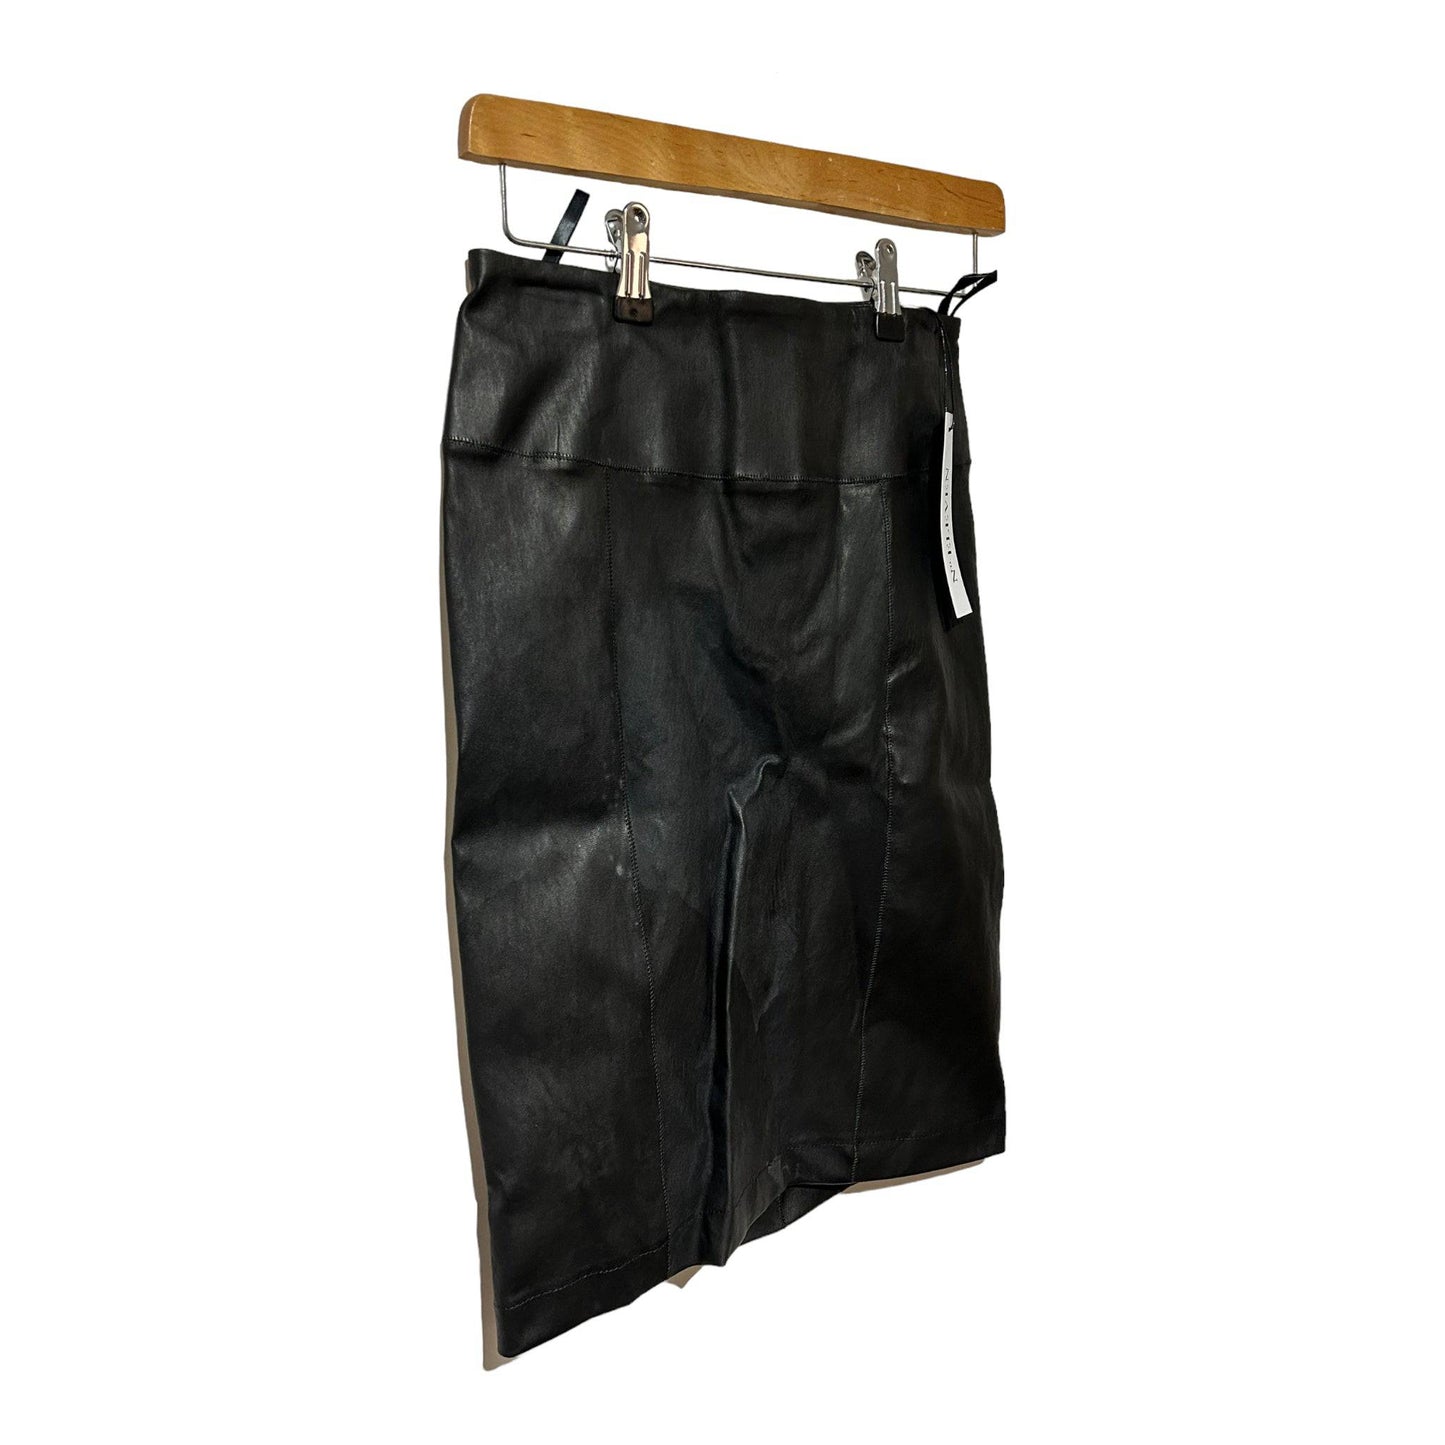 No.Eleven Leather Skirt - Recurring.Life